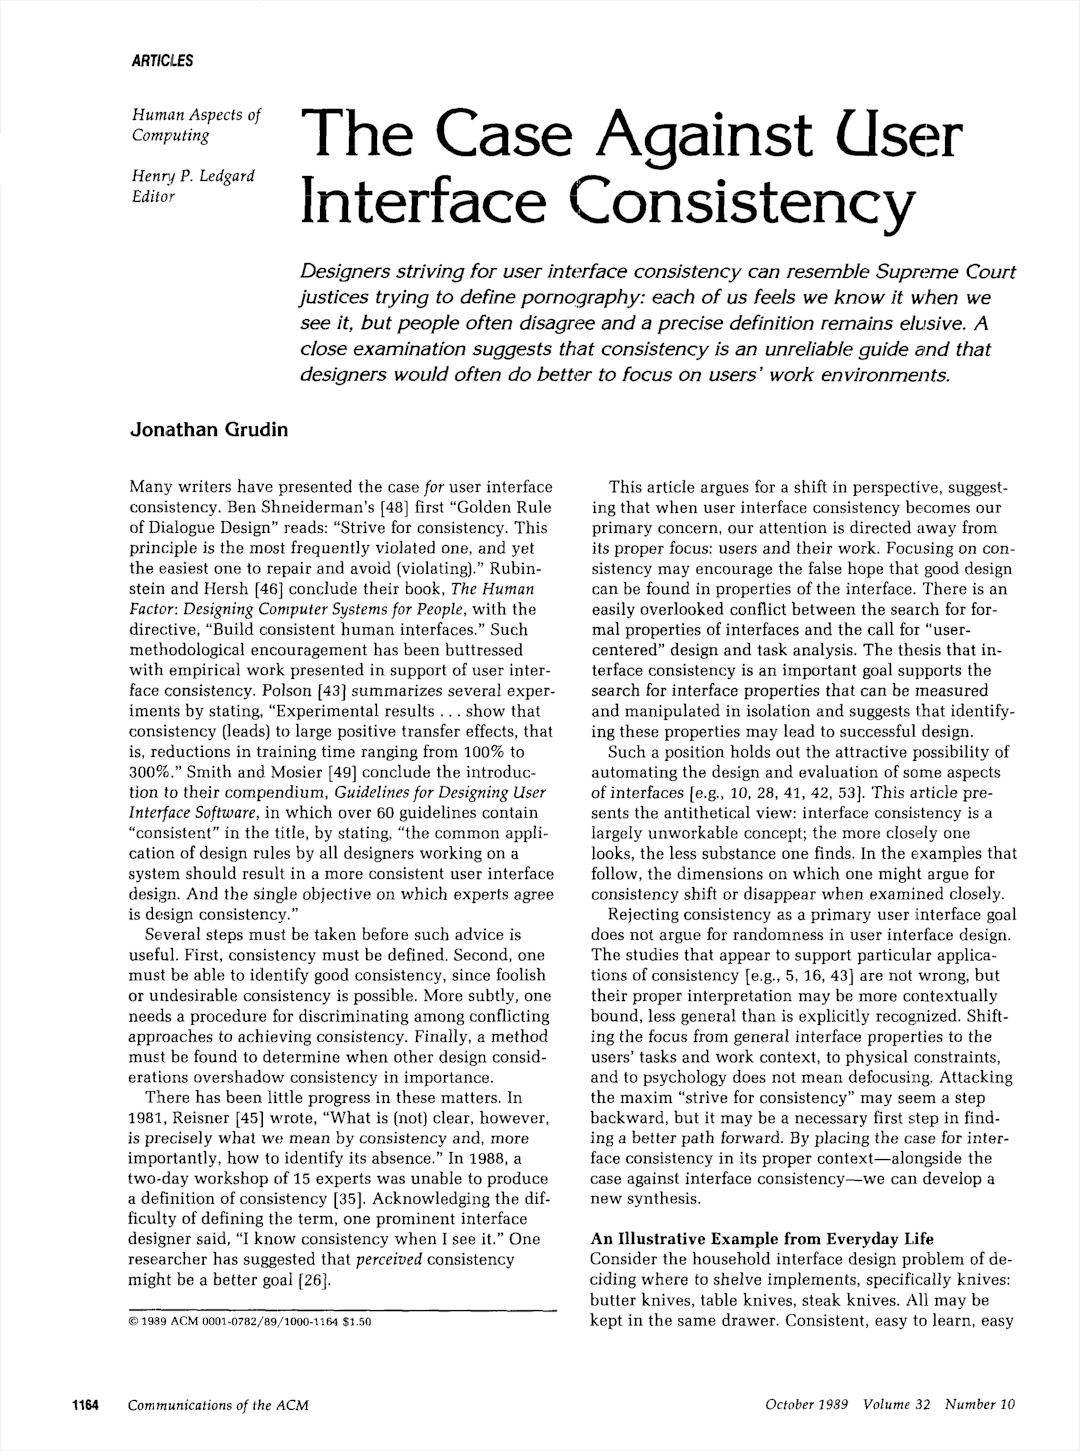 The Case Against User Interface Consistency